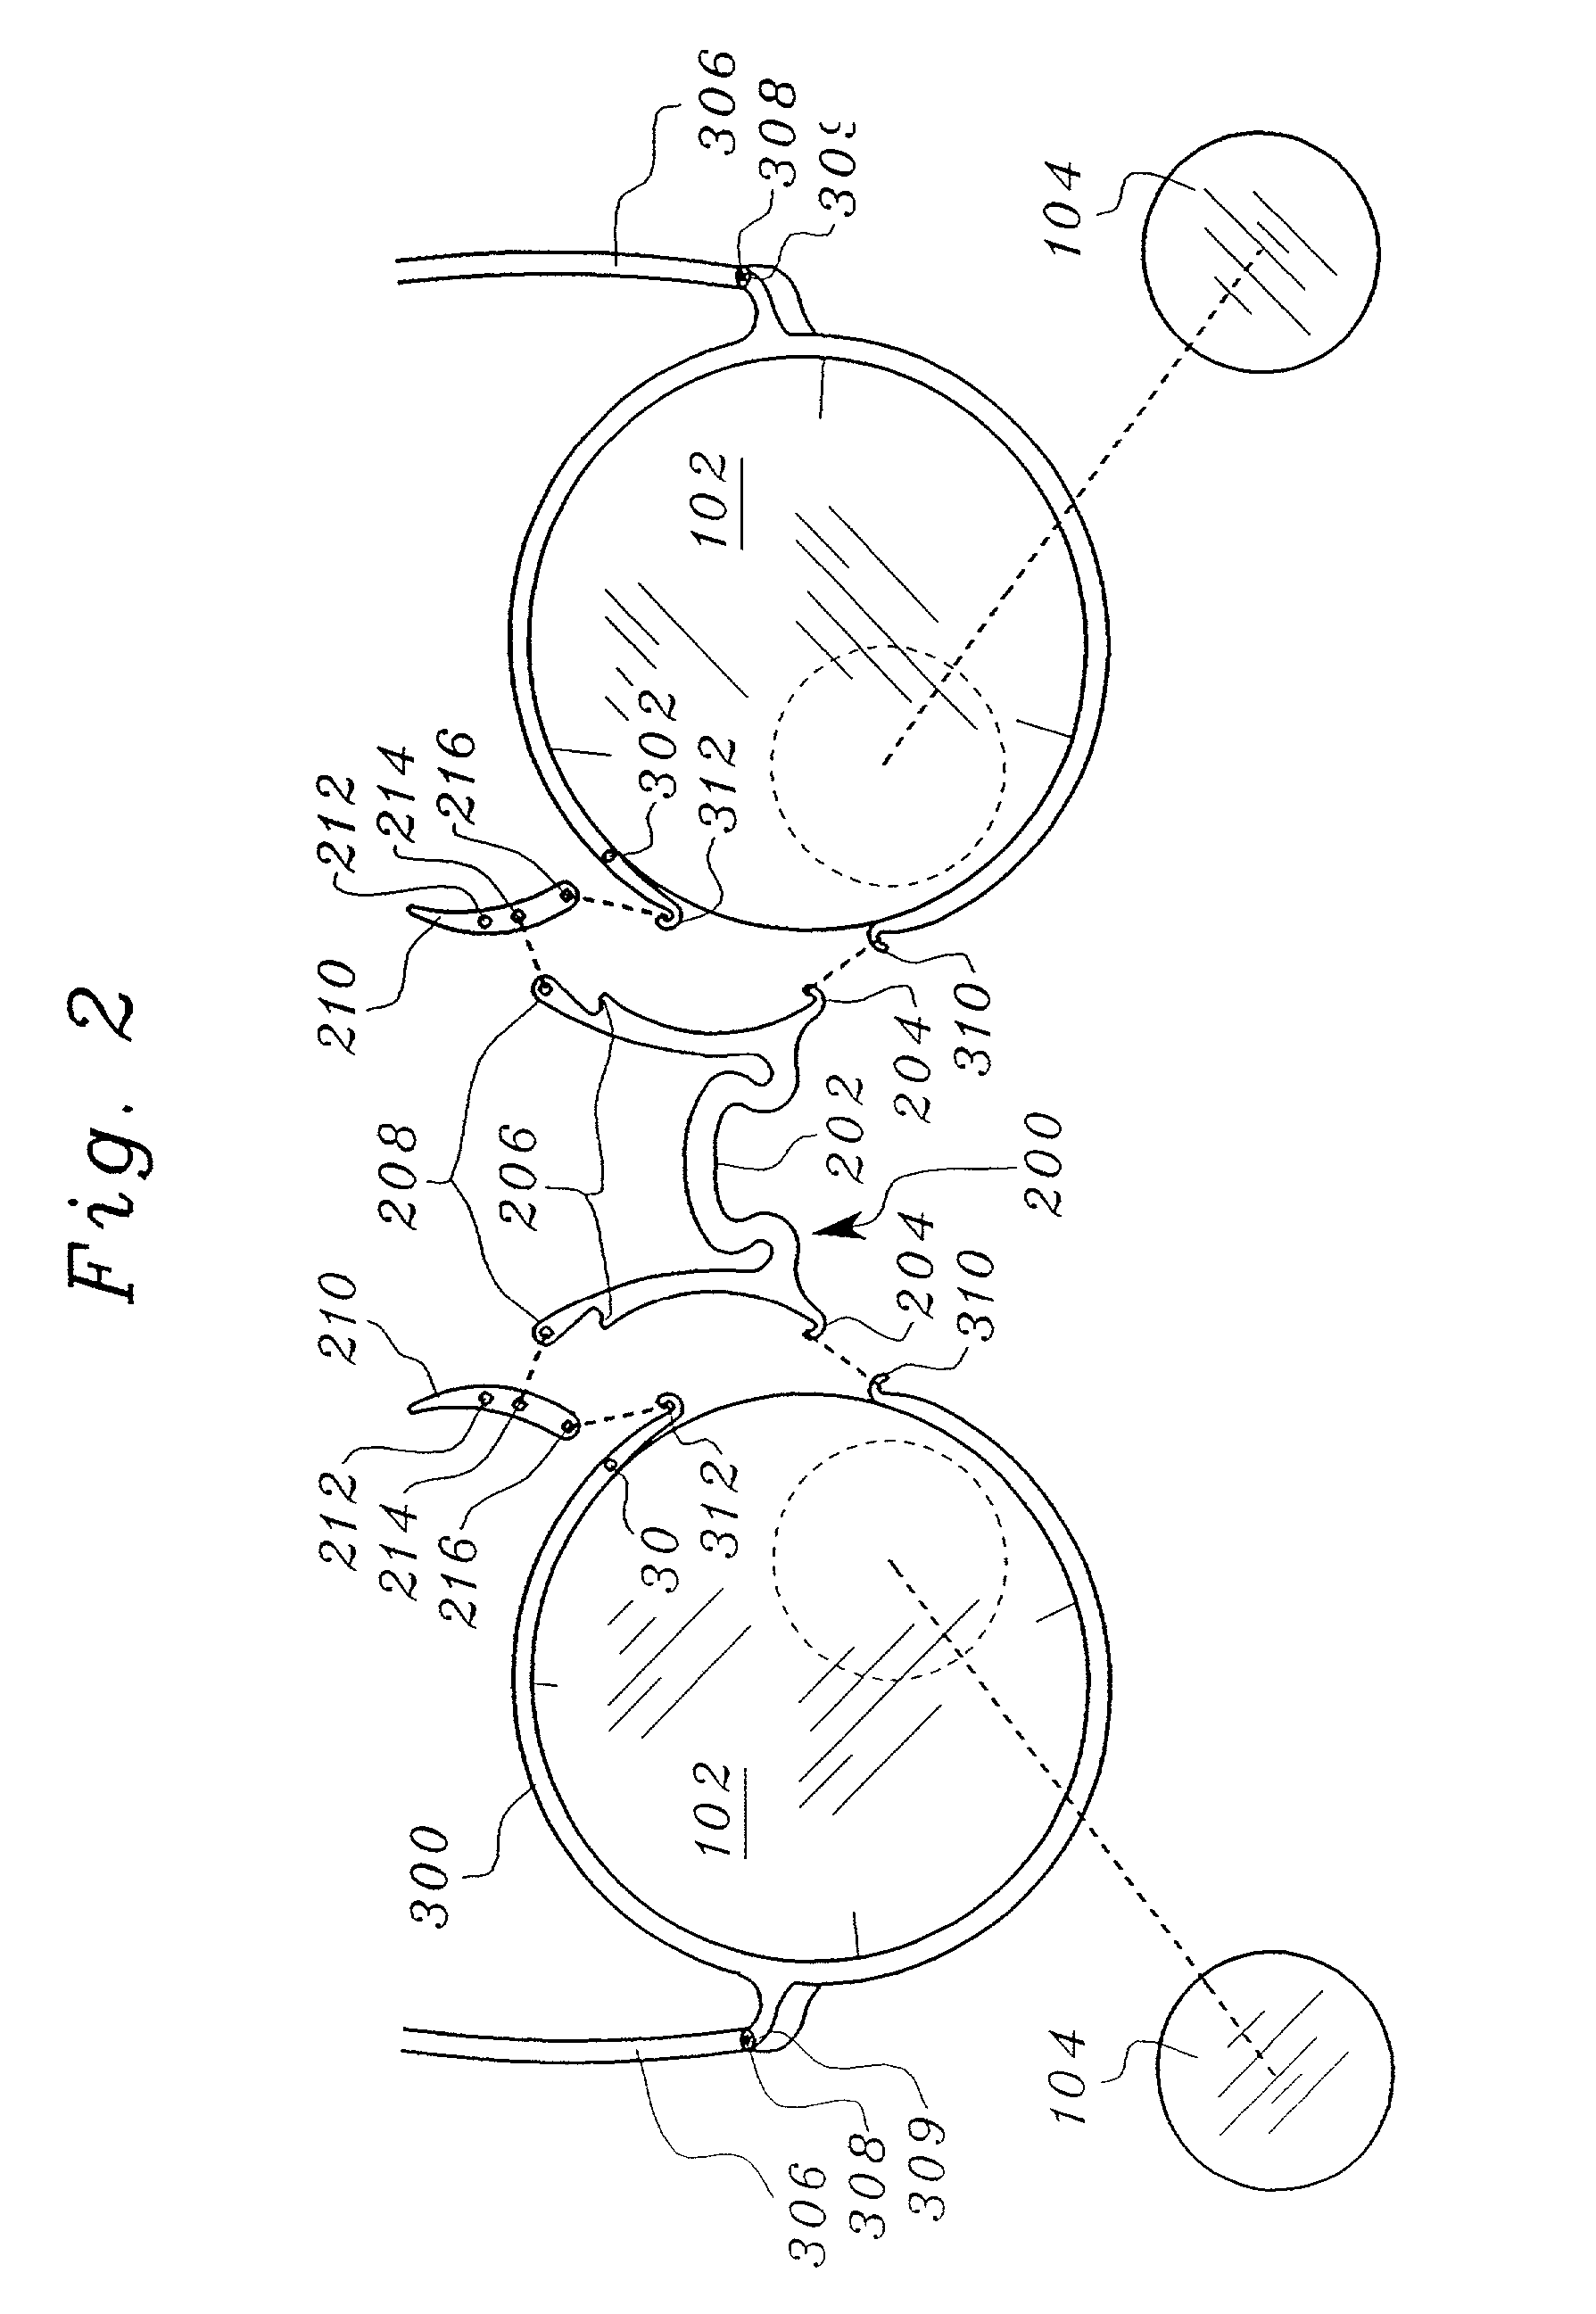 Interchangeable lens eyeglass system with interchangeable nosepiece